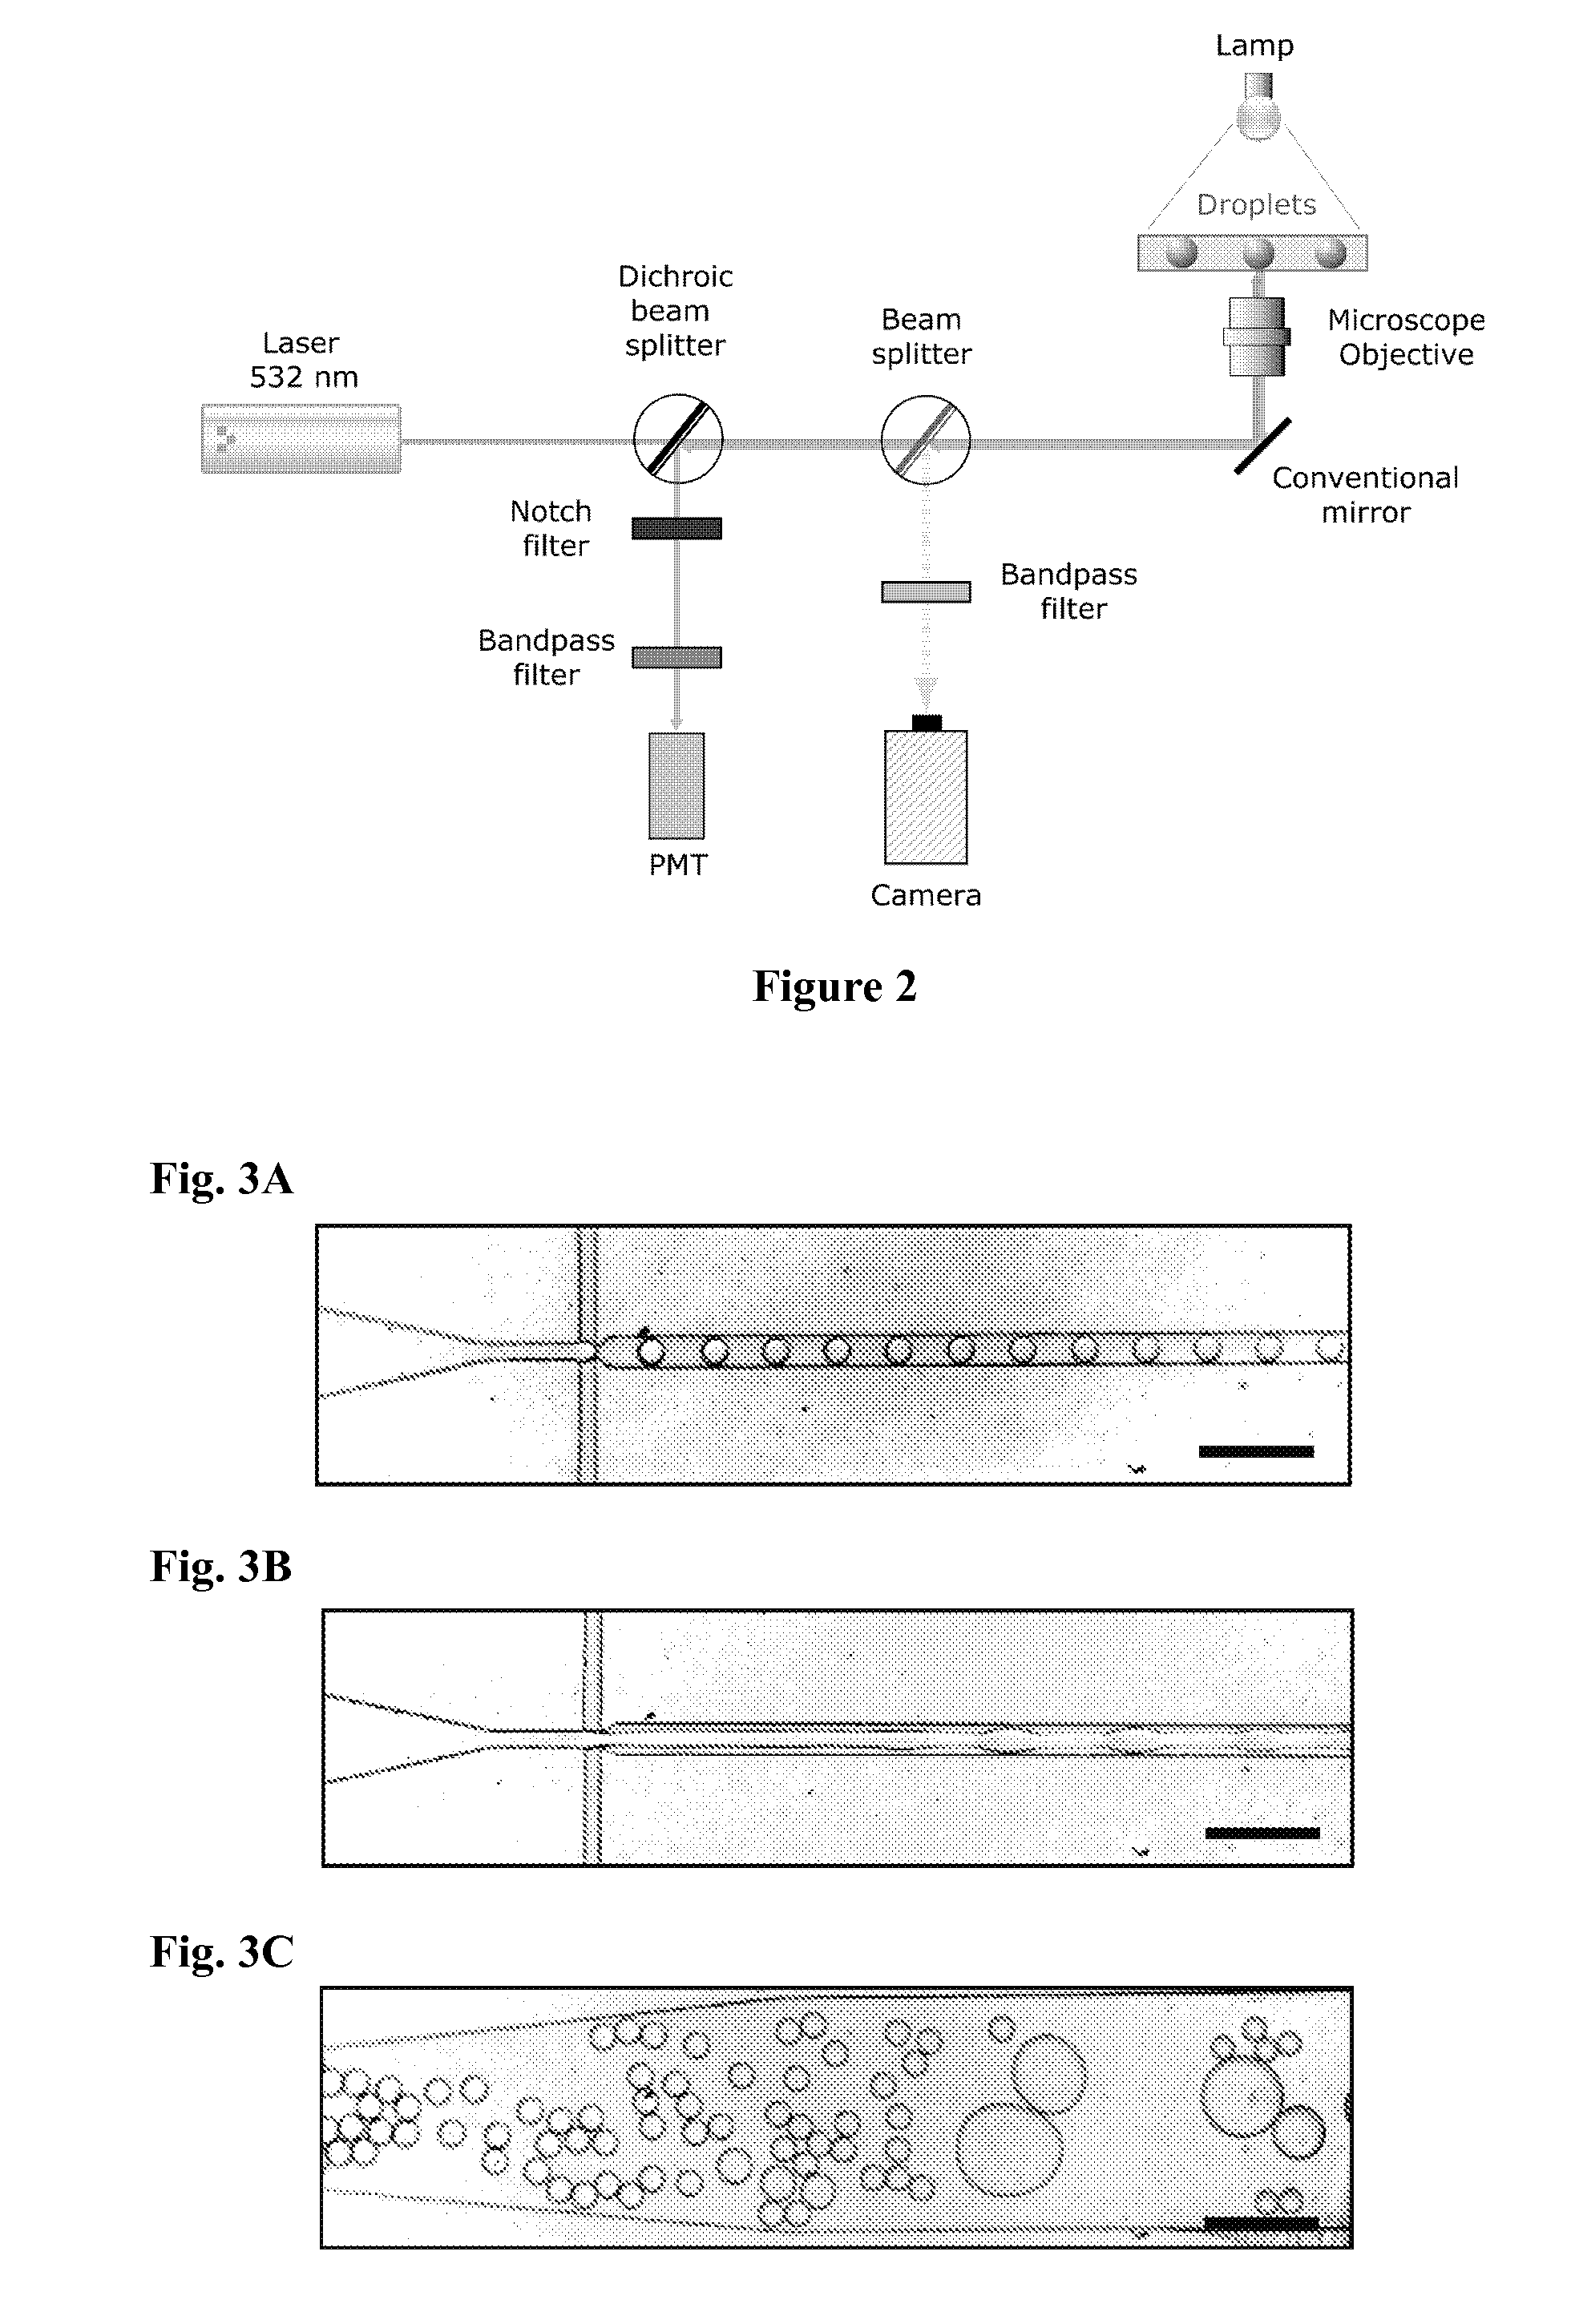 Microfluidic system and methods for highly selective droplet fusion